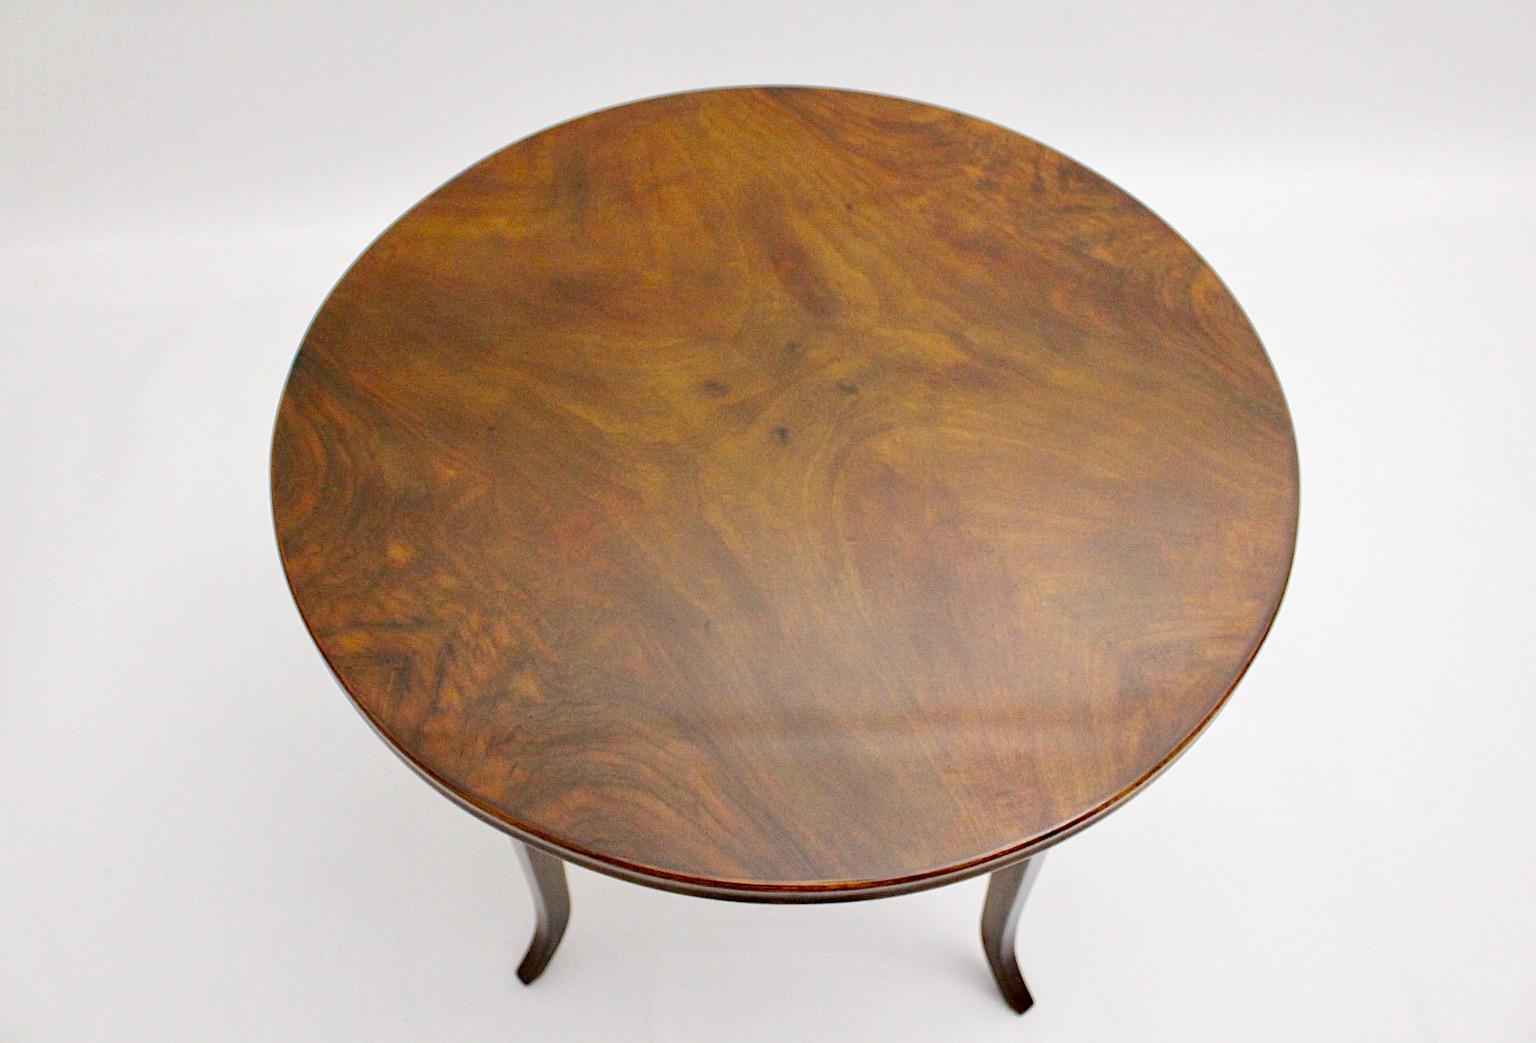 Josef Frank Walnut Vintage Circular Coffee Table Side Table, Austria, 1930s In Good Condition For Sale In Vienna, AT